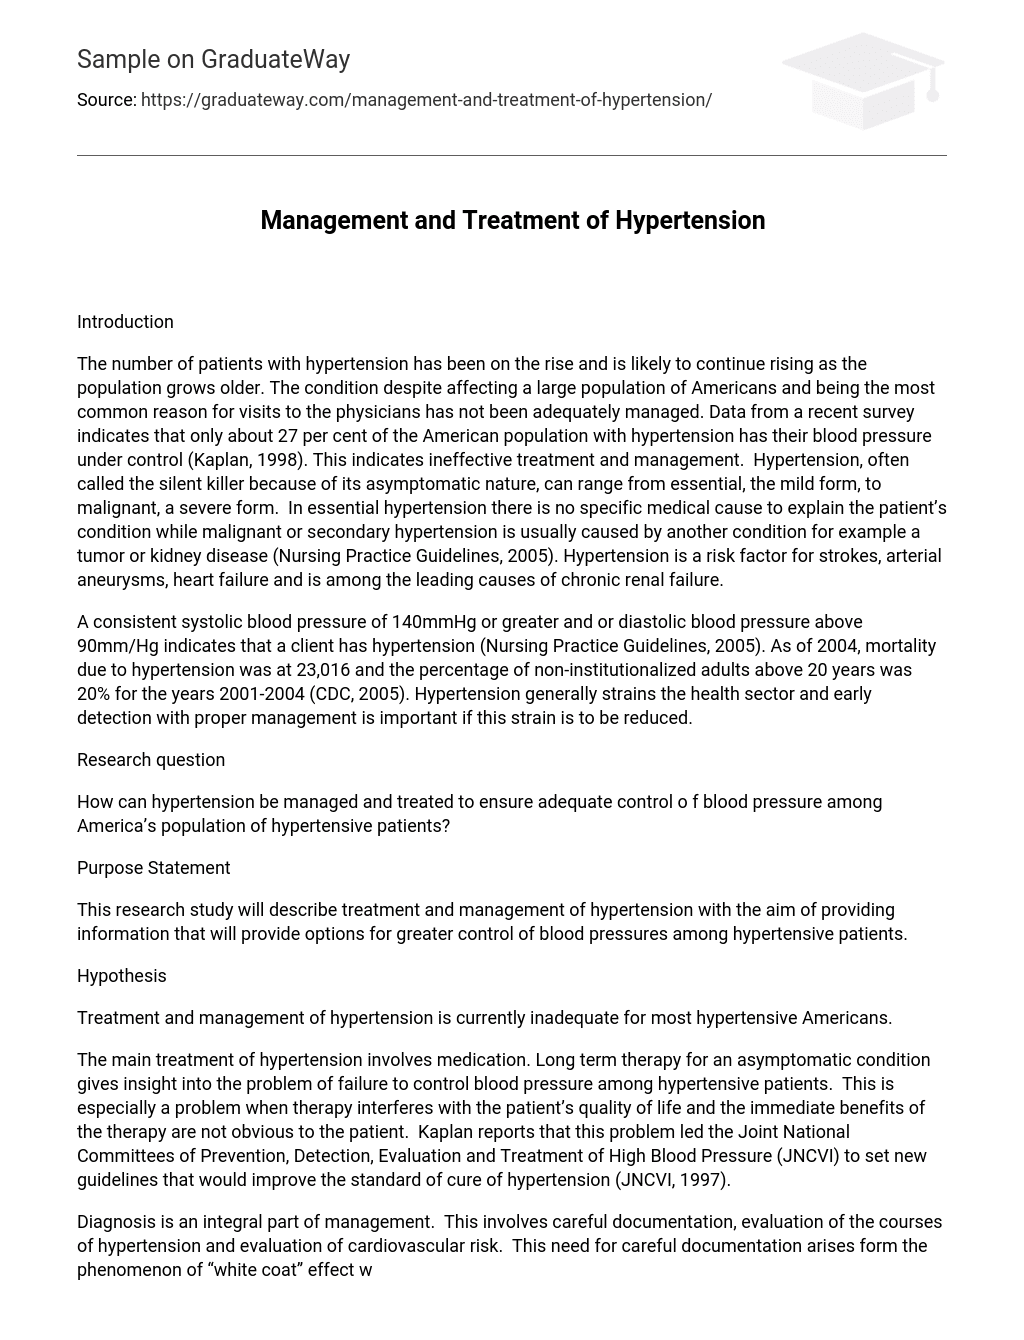 Management and Treatment of Hypertension